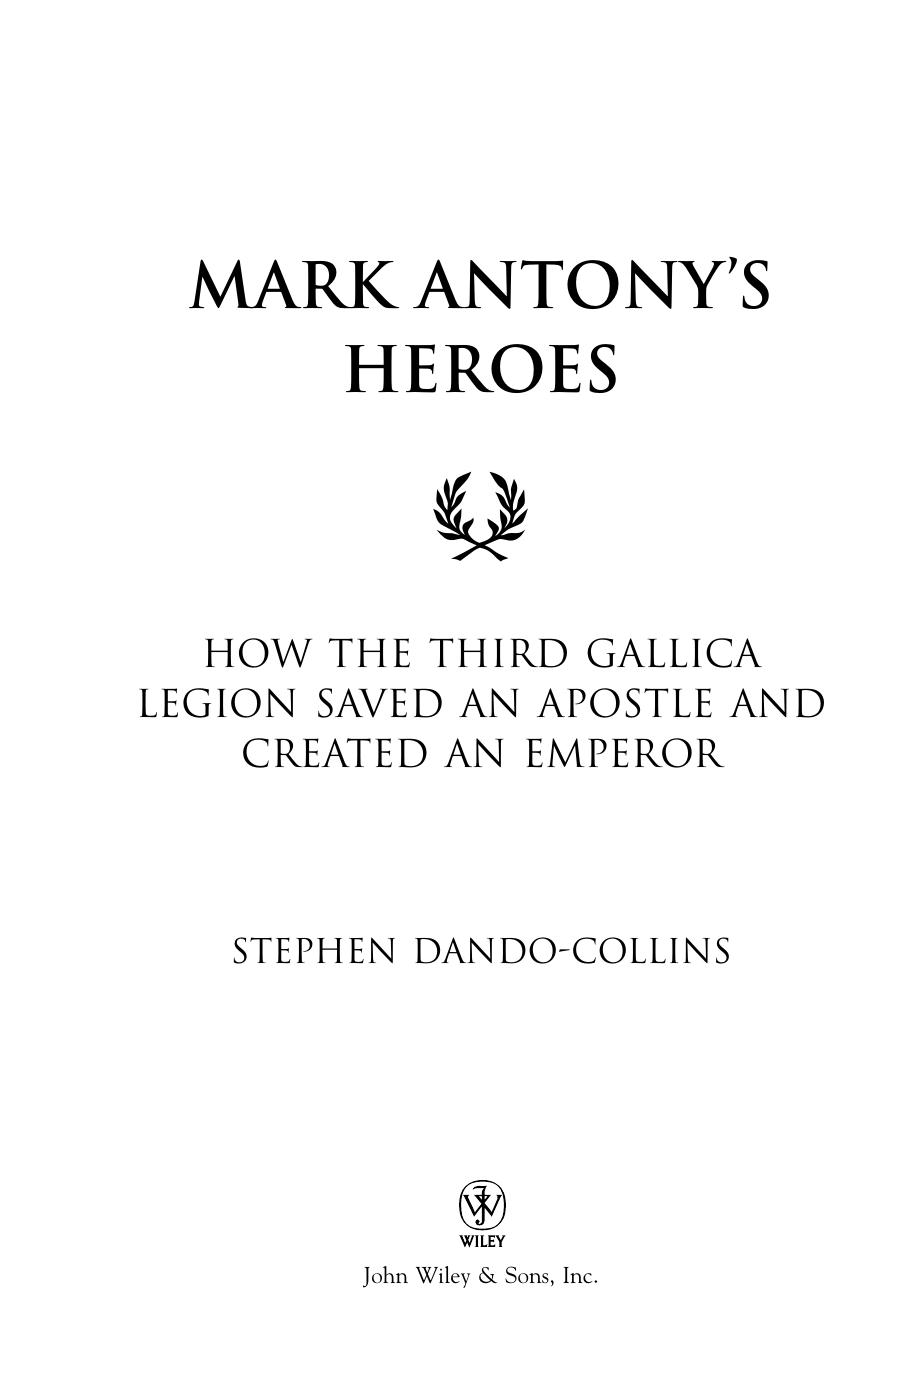 Mark Antony's Heroes: How the Third Gallica Legion Saved an Apostle and Created an Emperor by Stephen Dando-Collins